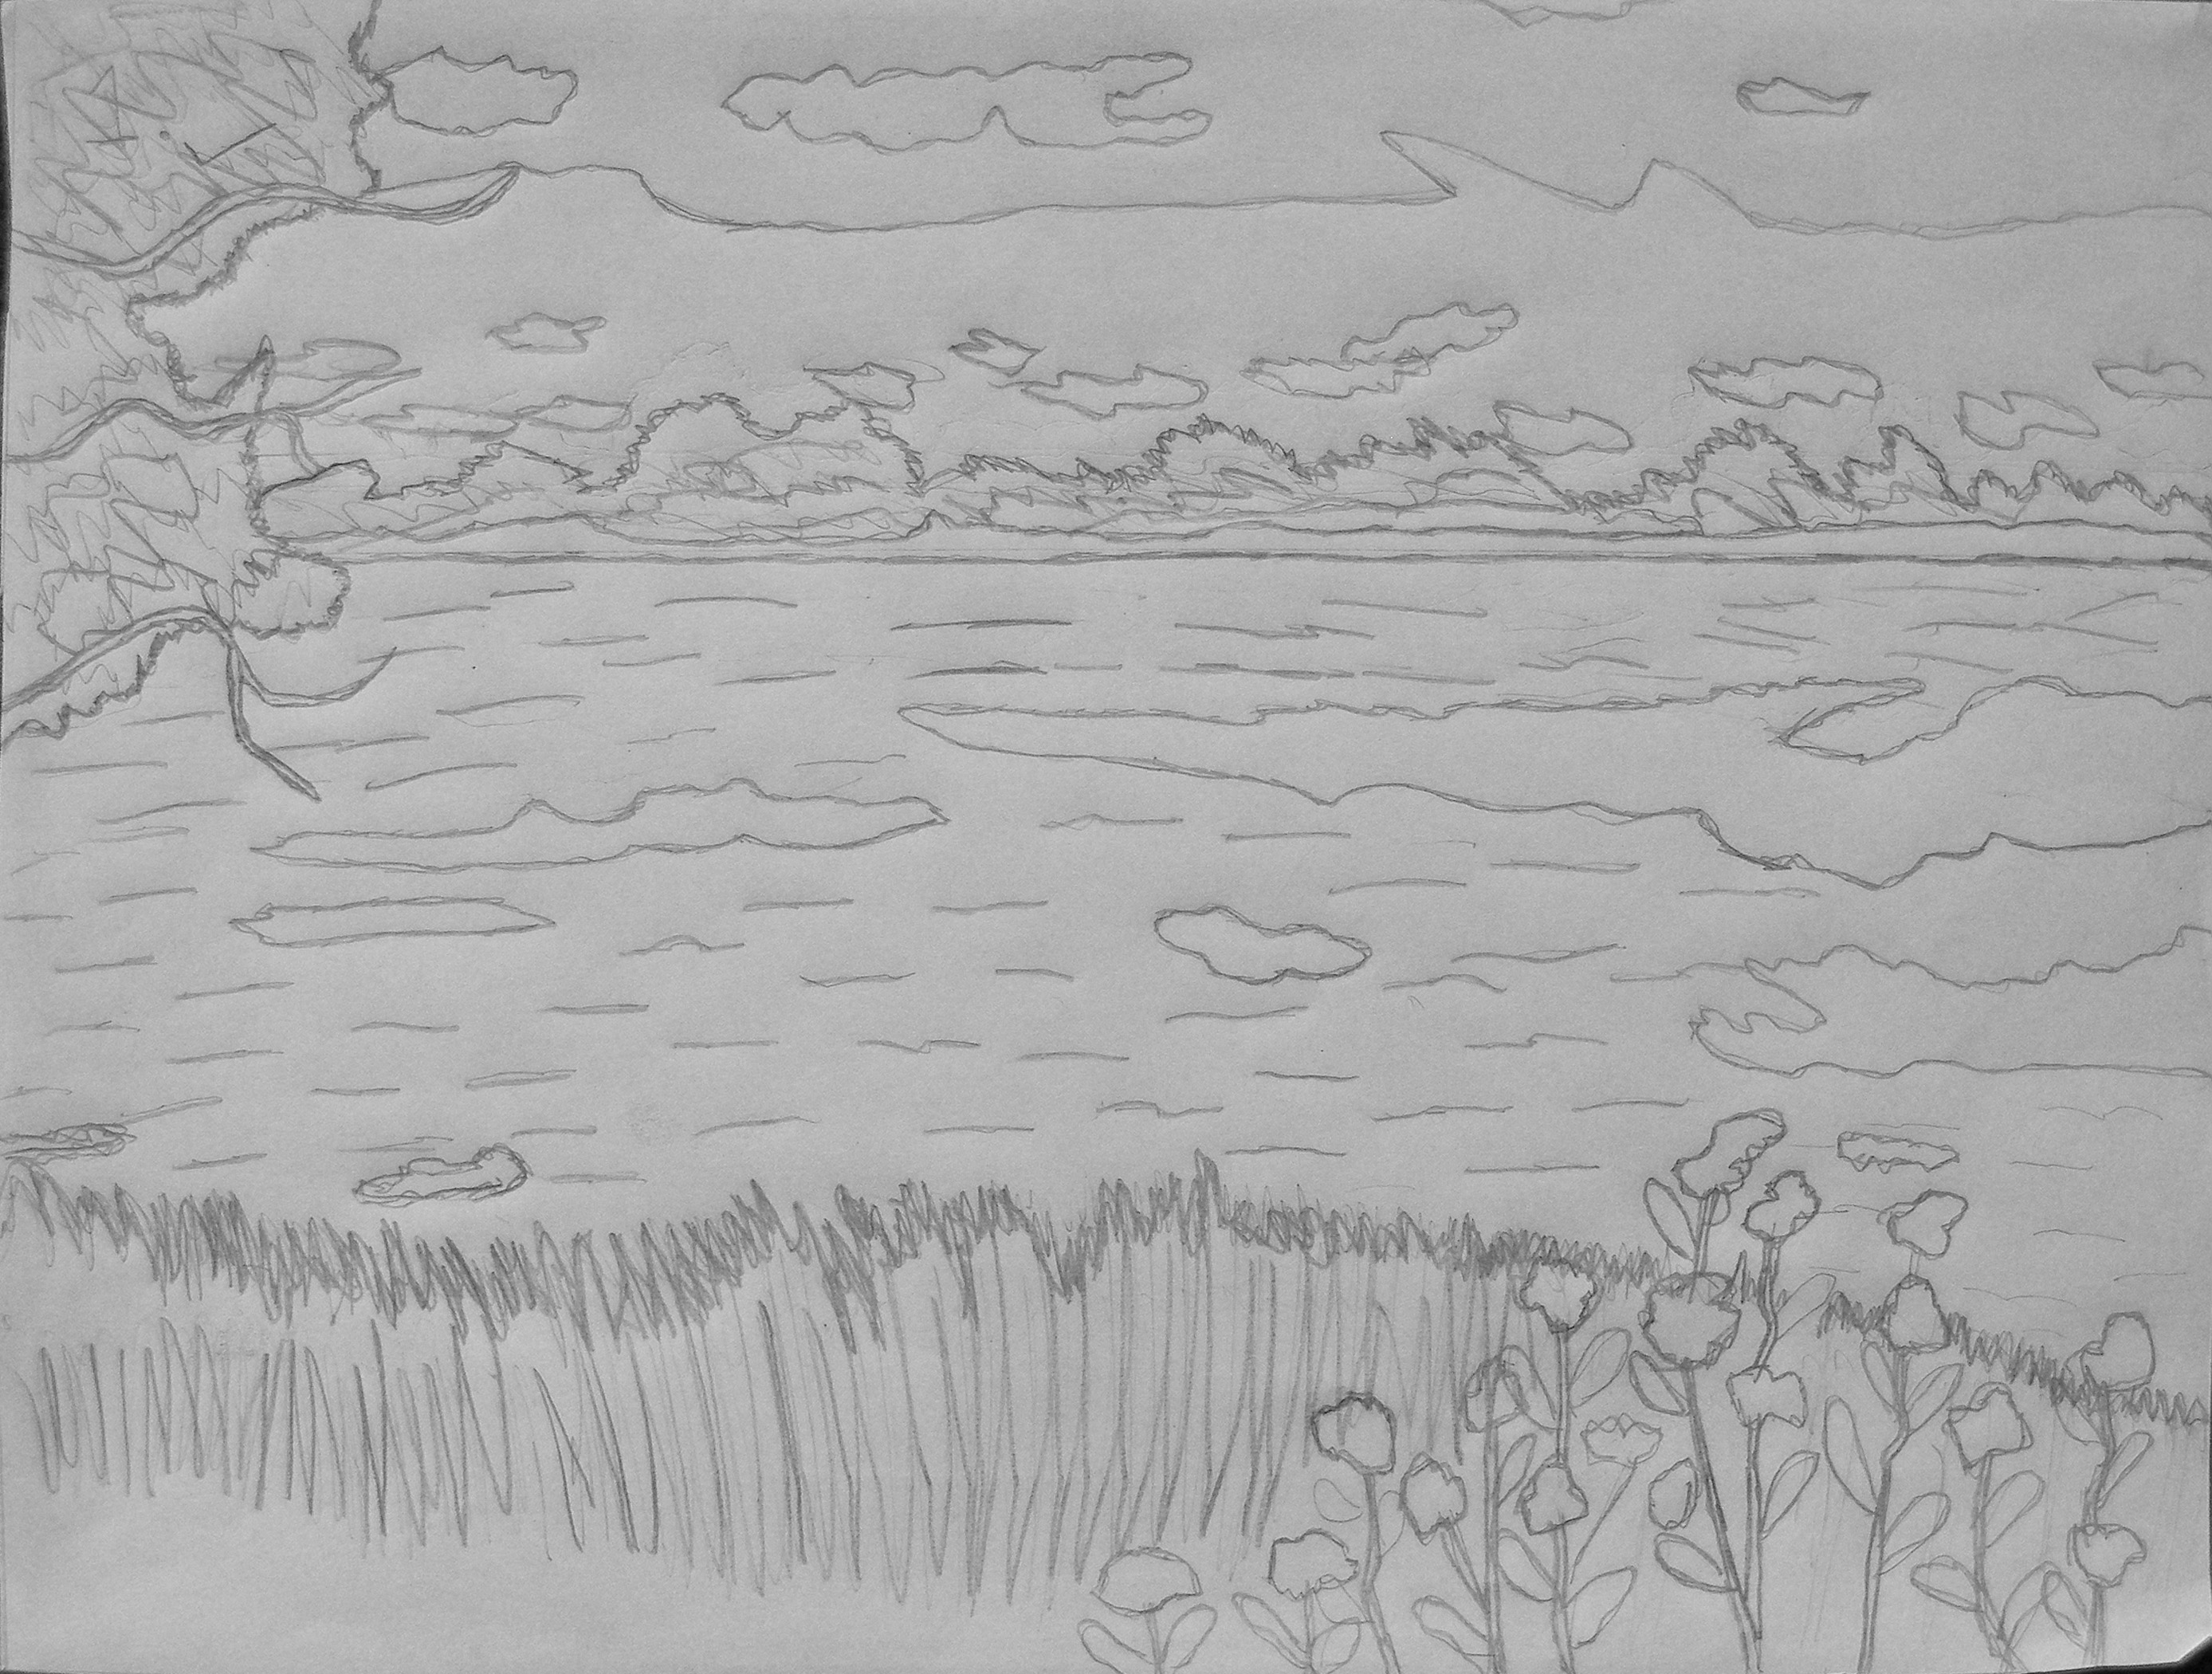 east_bay_drawing_small